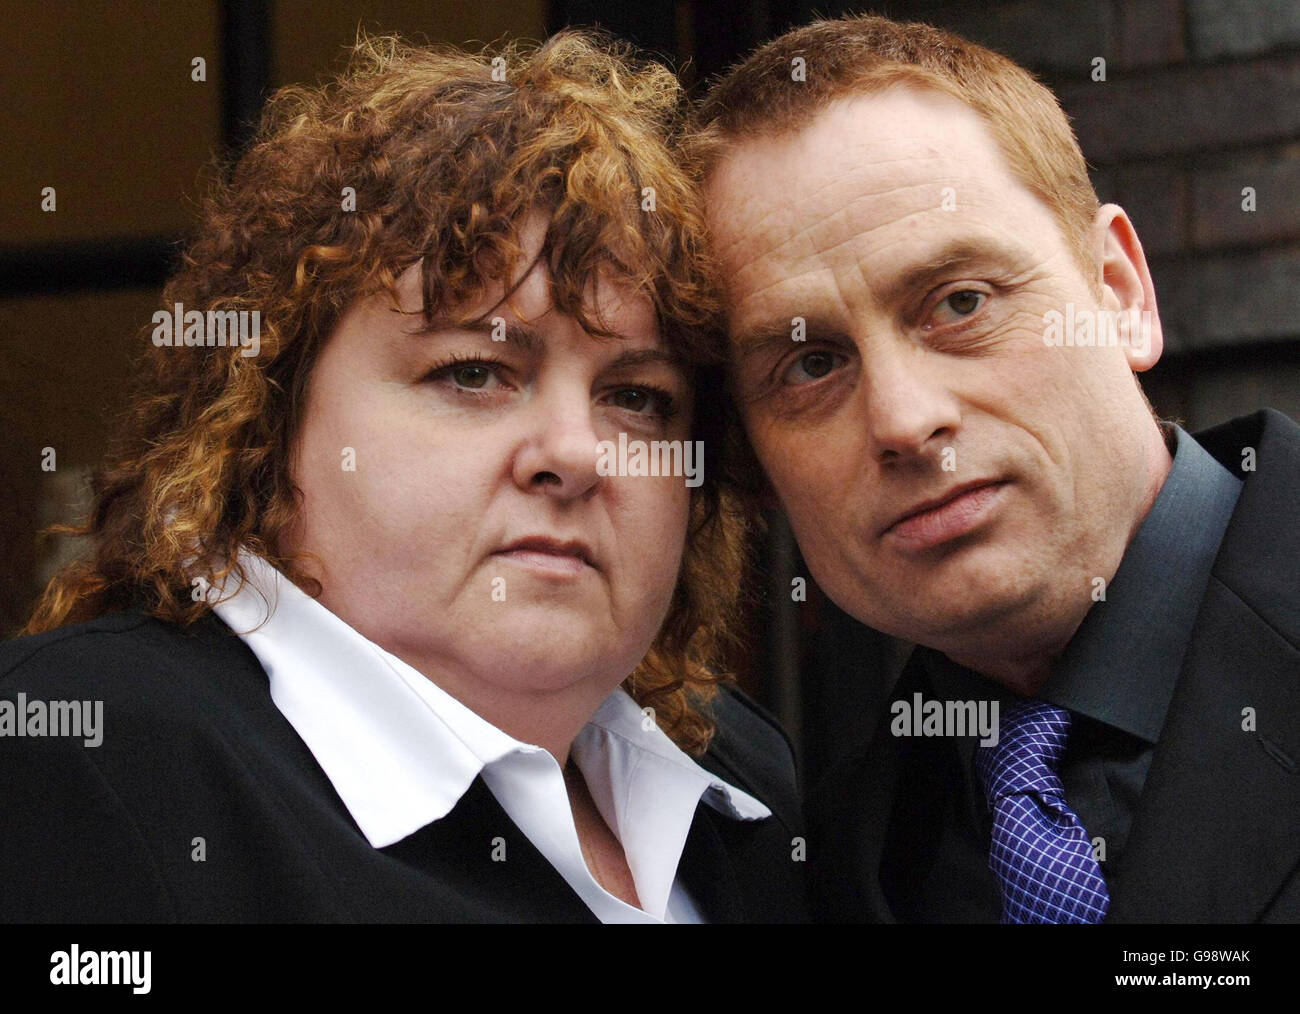 Yvonne and Jim Collinson outside Epsom Magistrates' Court, Friday March 10, 2006, where a jury delivered an open verdict today on the death of their son, Private James Collinson. Private Collinson, 17, from Perth, was found dead with a single gunshot wound to his head close to the perimeter fence of the Deepcut army barracks in Surrey where he had been on guard duty on the night of March 23, 2002. See PA story INQUEST Deepcut. PRESS ASSOCIATION photo. Photo Credit should read: Fiona Hanson/PA. Stock Photo